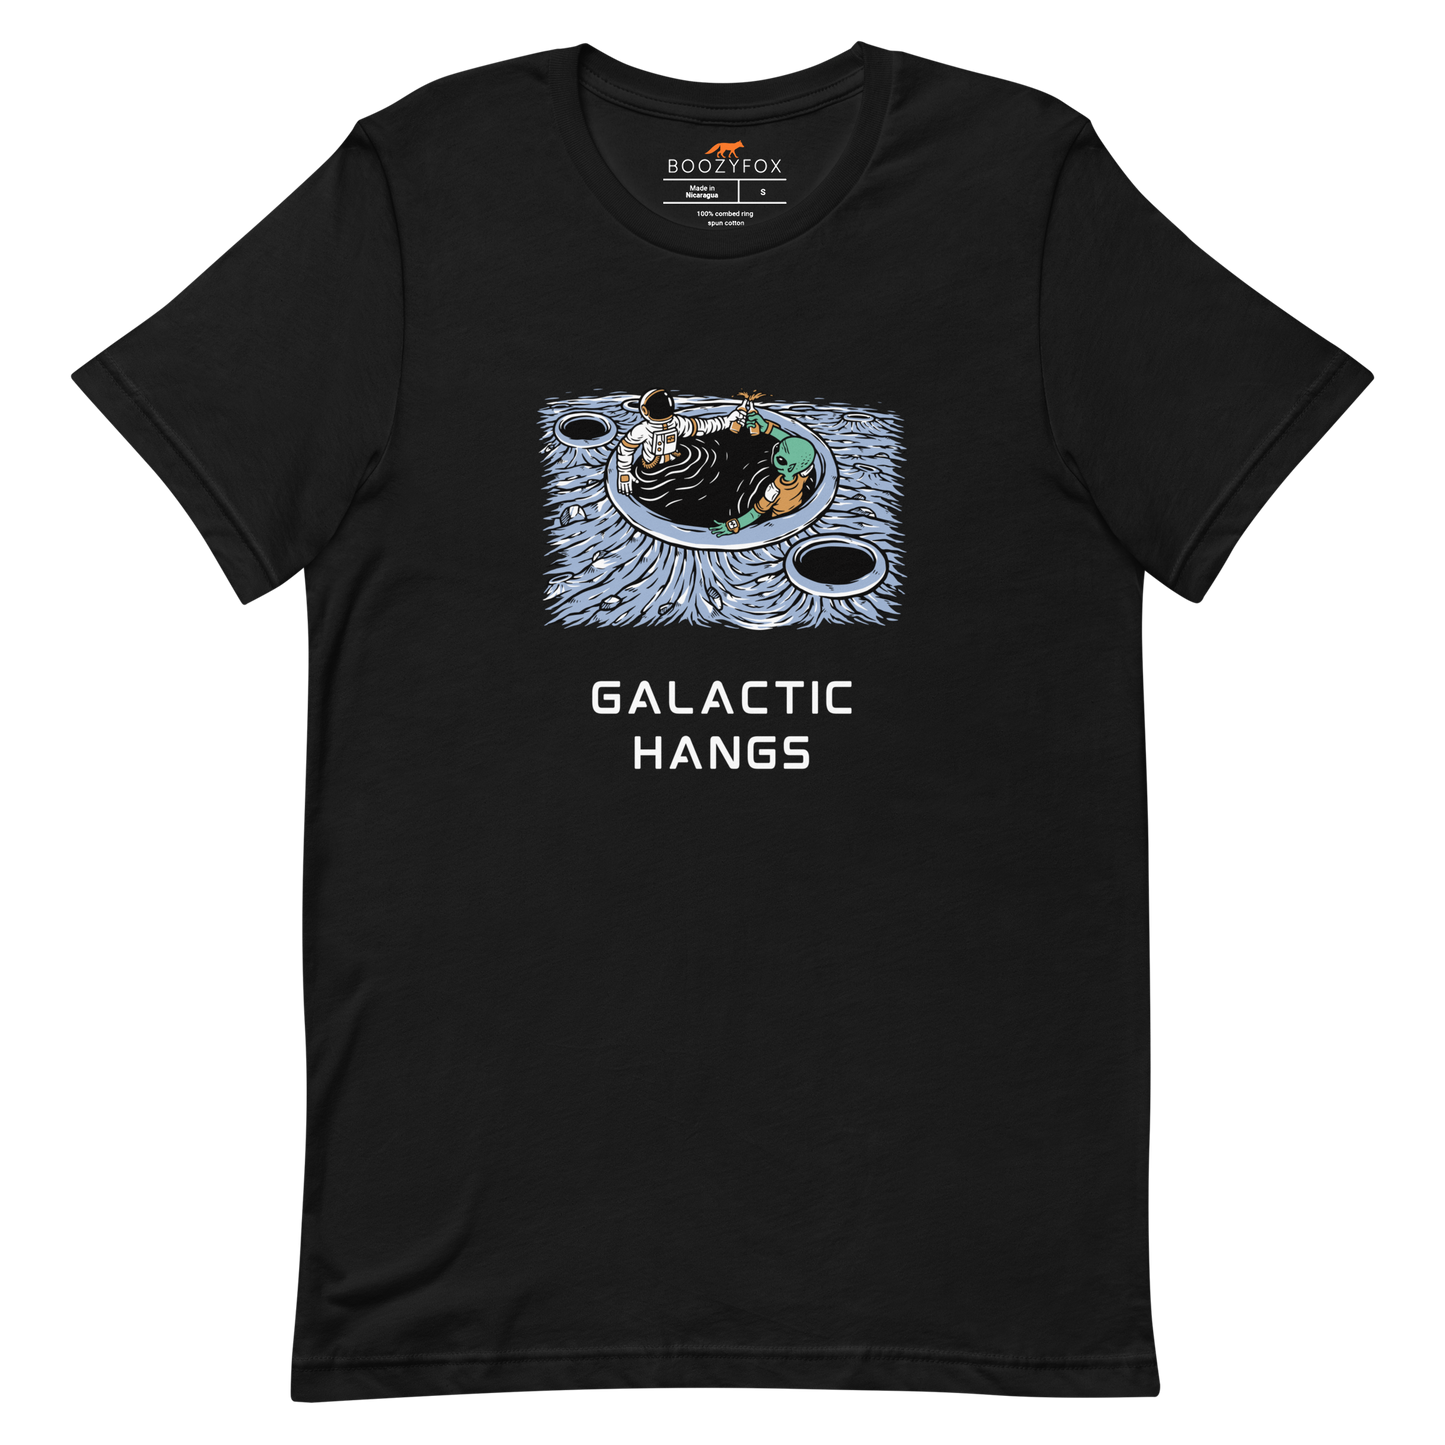 Black Premium Galactic Hangs Tee featuring an out-of-this-world graphic of an Astronaut and Alien Chilling Together - Funny Graphic Space Tees - Boozy Fox